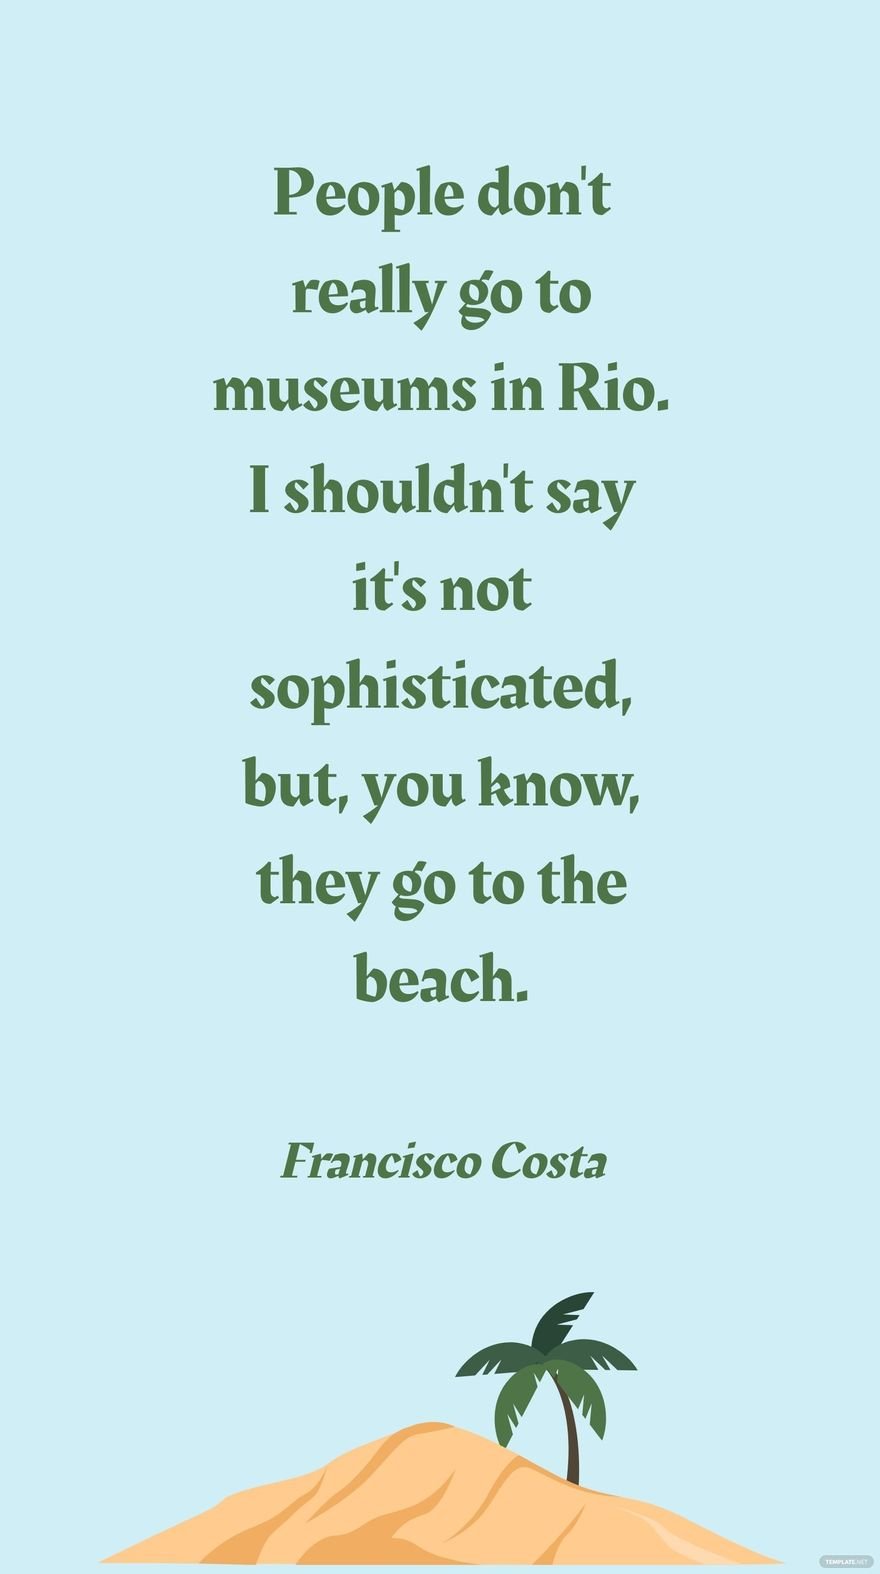 Francisco Costa - People don't really go to museums in Rio. I shouldn't say it's not sophisticated, but, you know, they go to the beach.